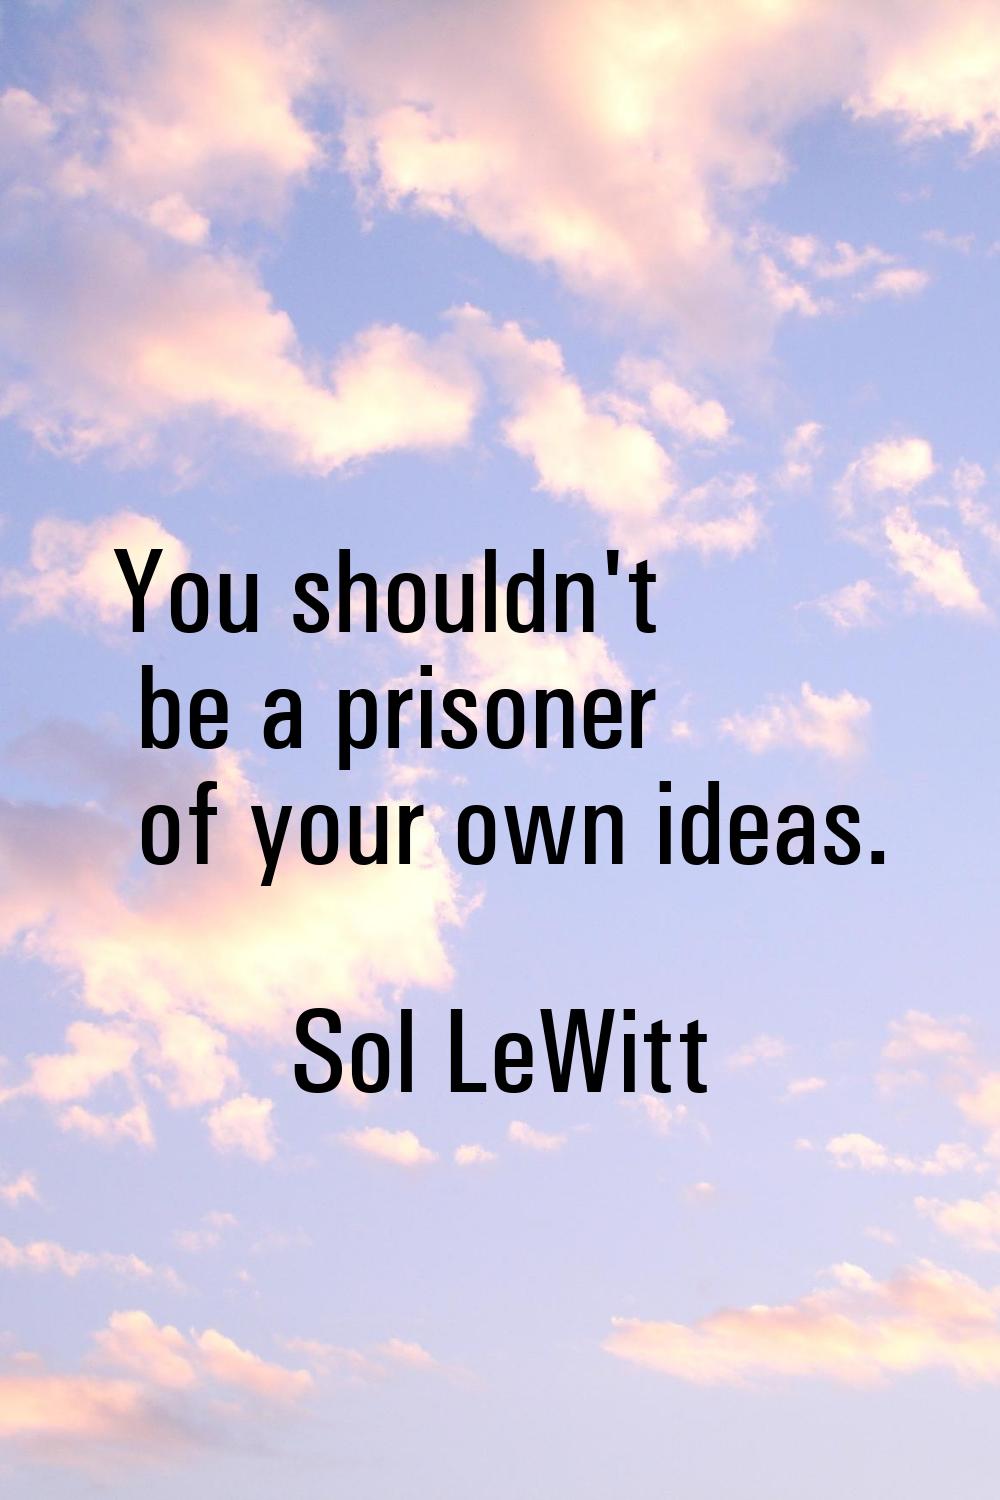 You shouldn't be a prisoner of your own ideas.